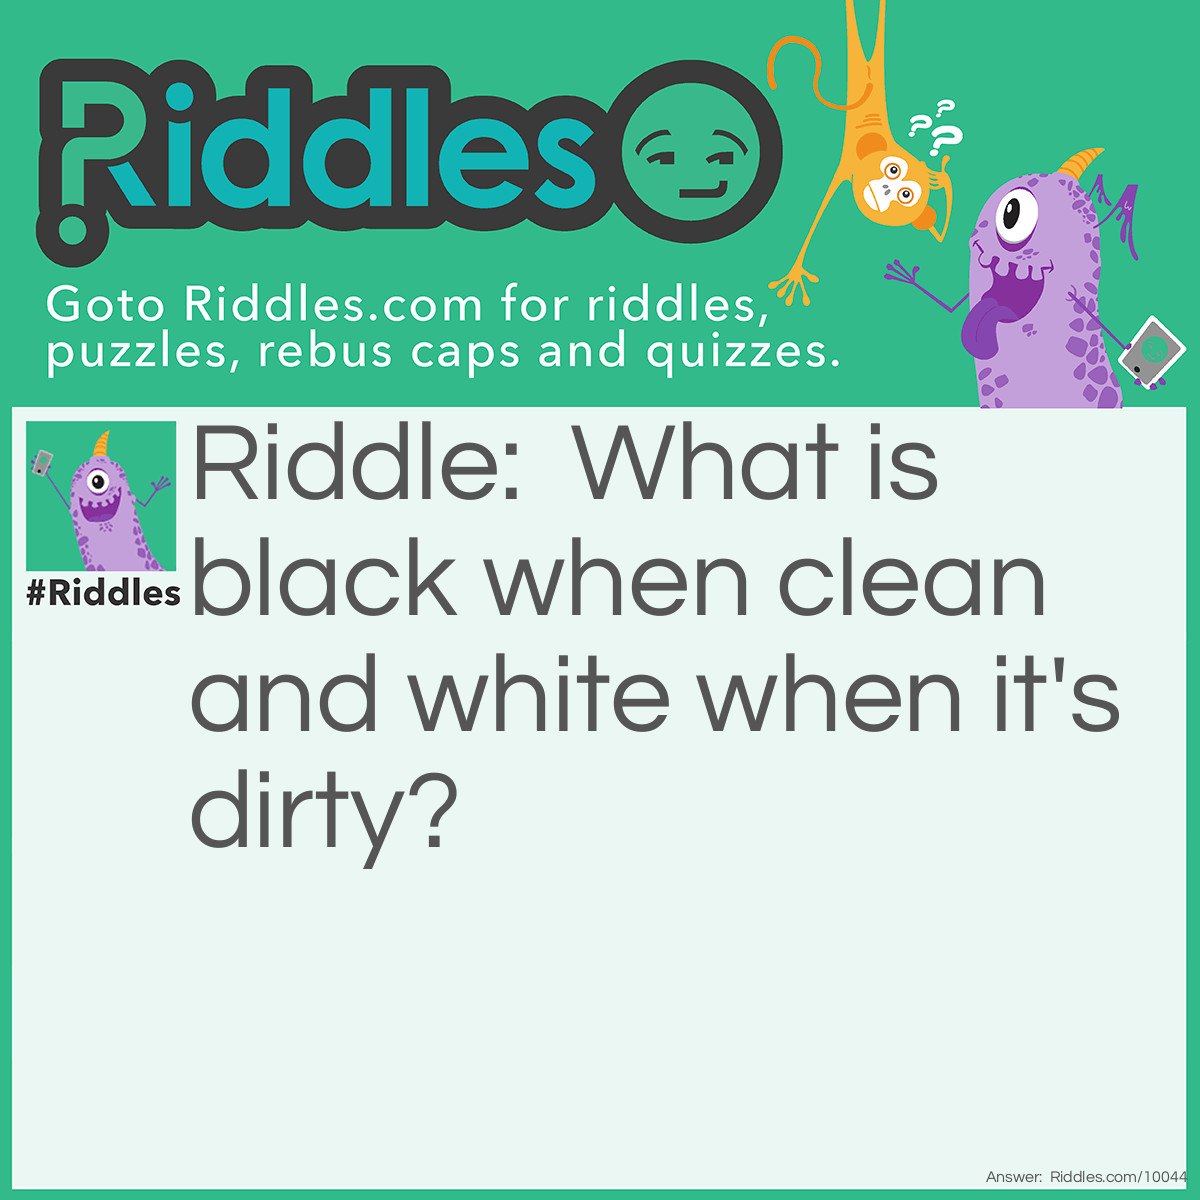 Riddle: What is black when clean and white when it's dirty? Answer: A chalkboard.